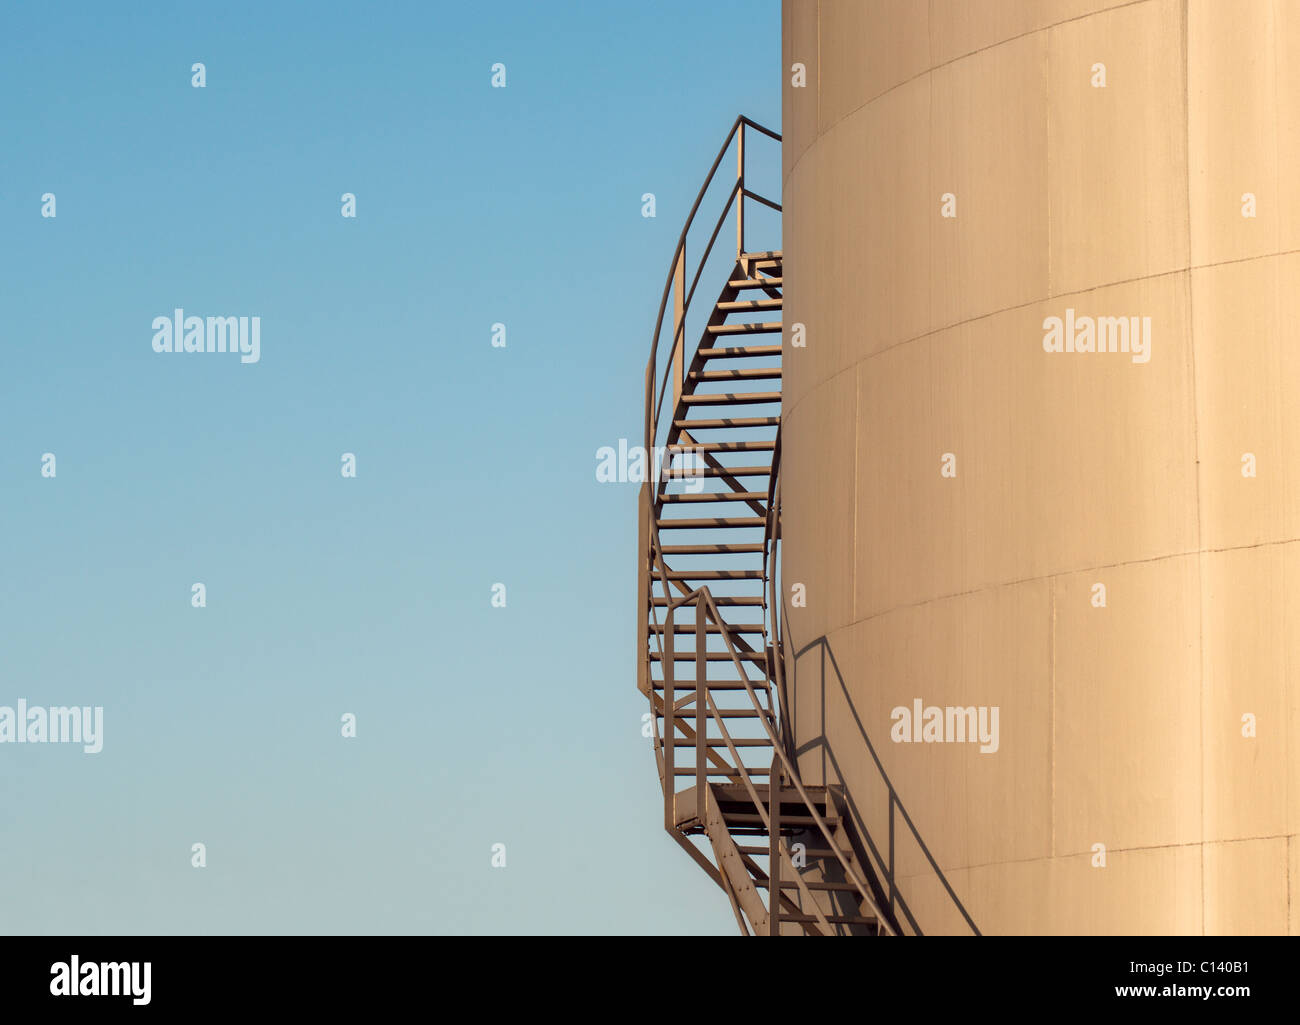 Winding Stairs high on a tower, bathed in sunlight Stock Photo